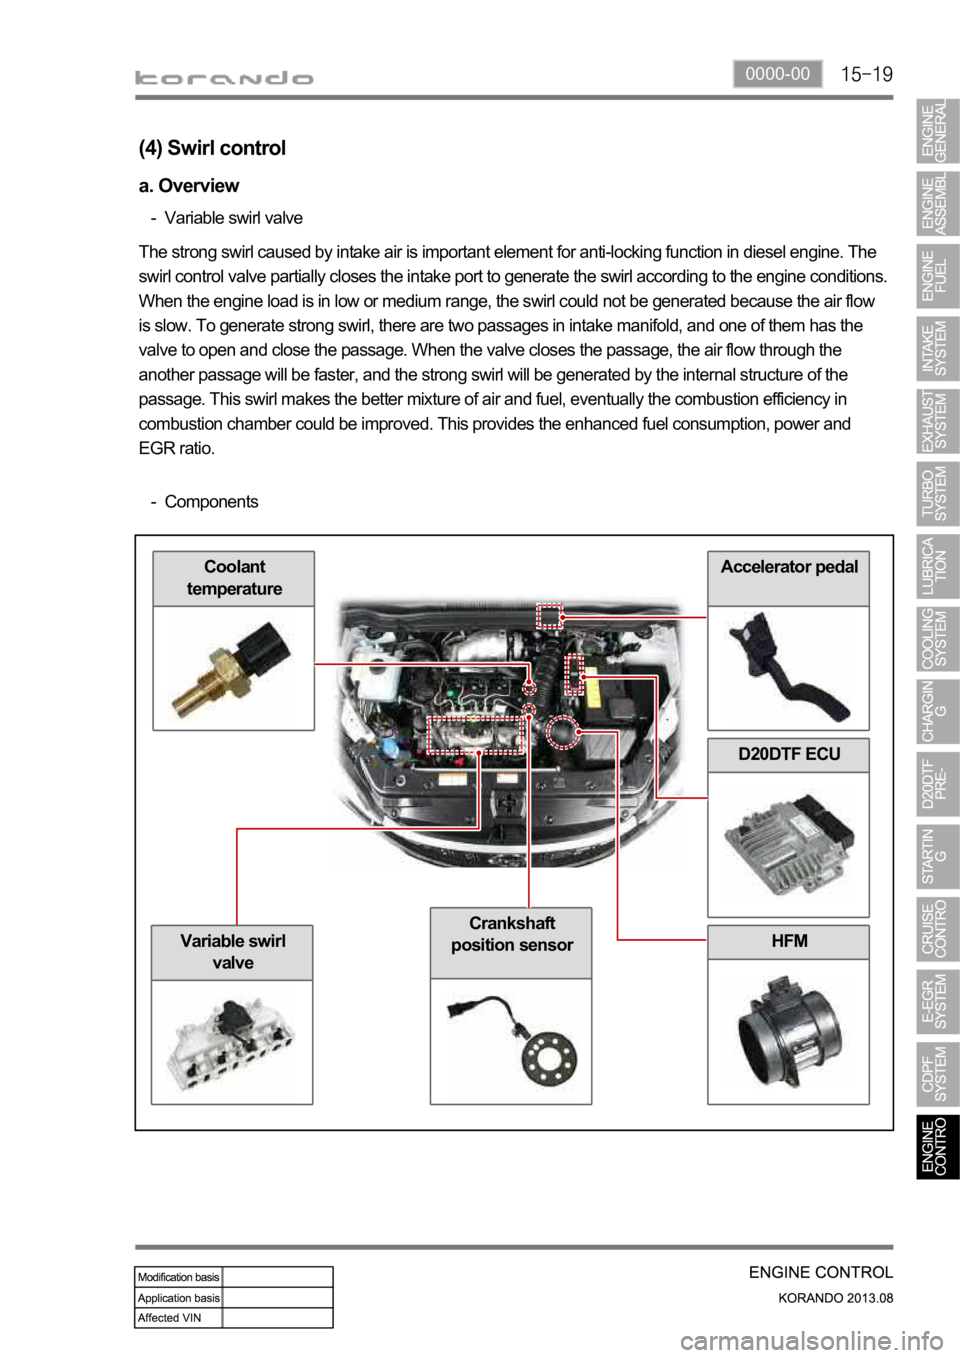 SSANGYONG KORANDO 2013  Service Manual 0000-00
HFM
Accelerator pedalCoolant 
temperature
(4) Swirl control
a. Overview
Variable swirl valve -
The strong swirl caused by intake air is important element for anti-locking function in diesel en